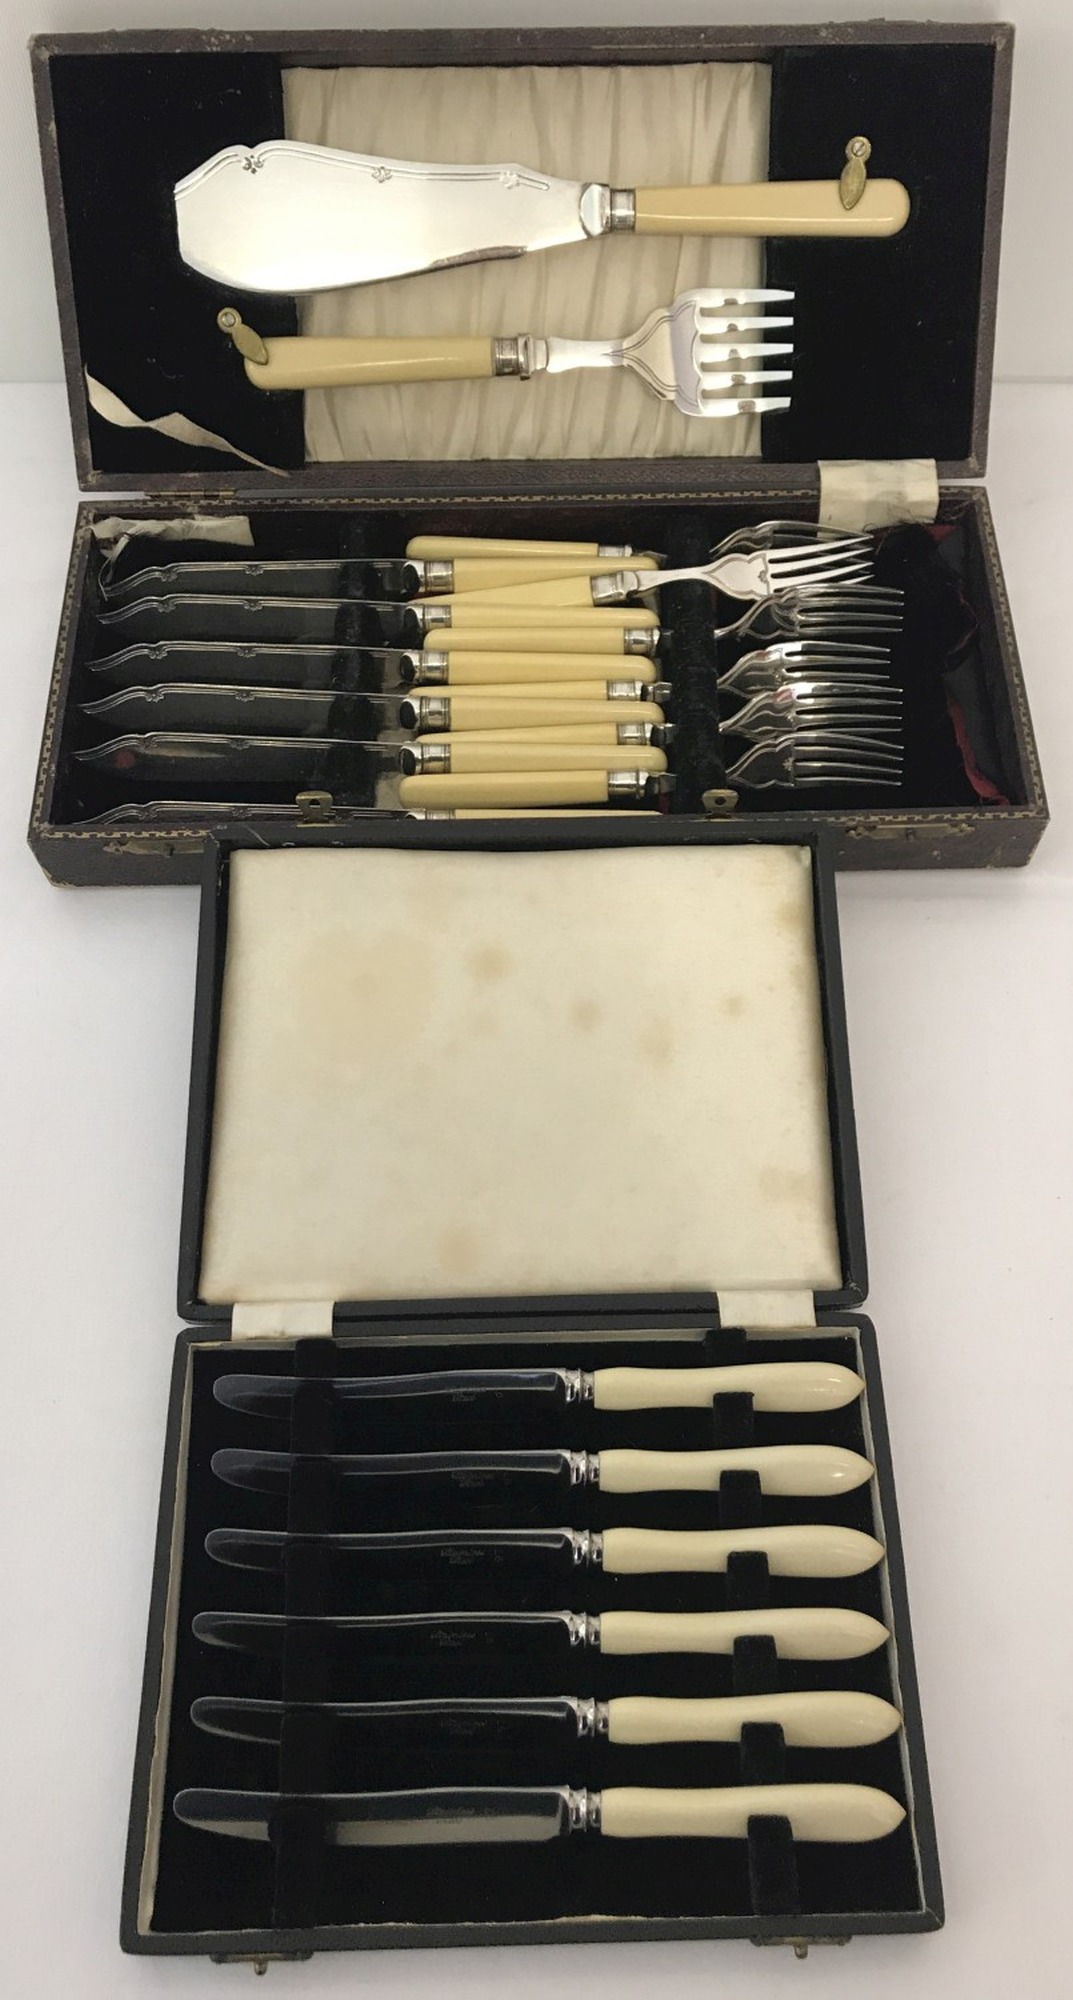 2 vintage boxed cutlery sets. A set of fish knives and forks, complete with servers